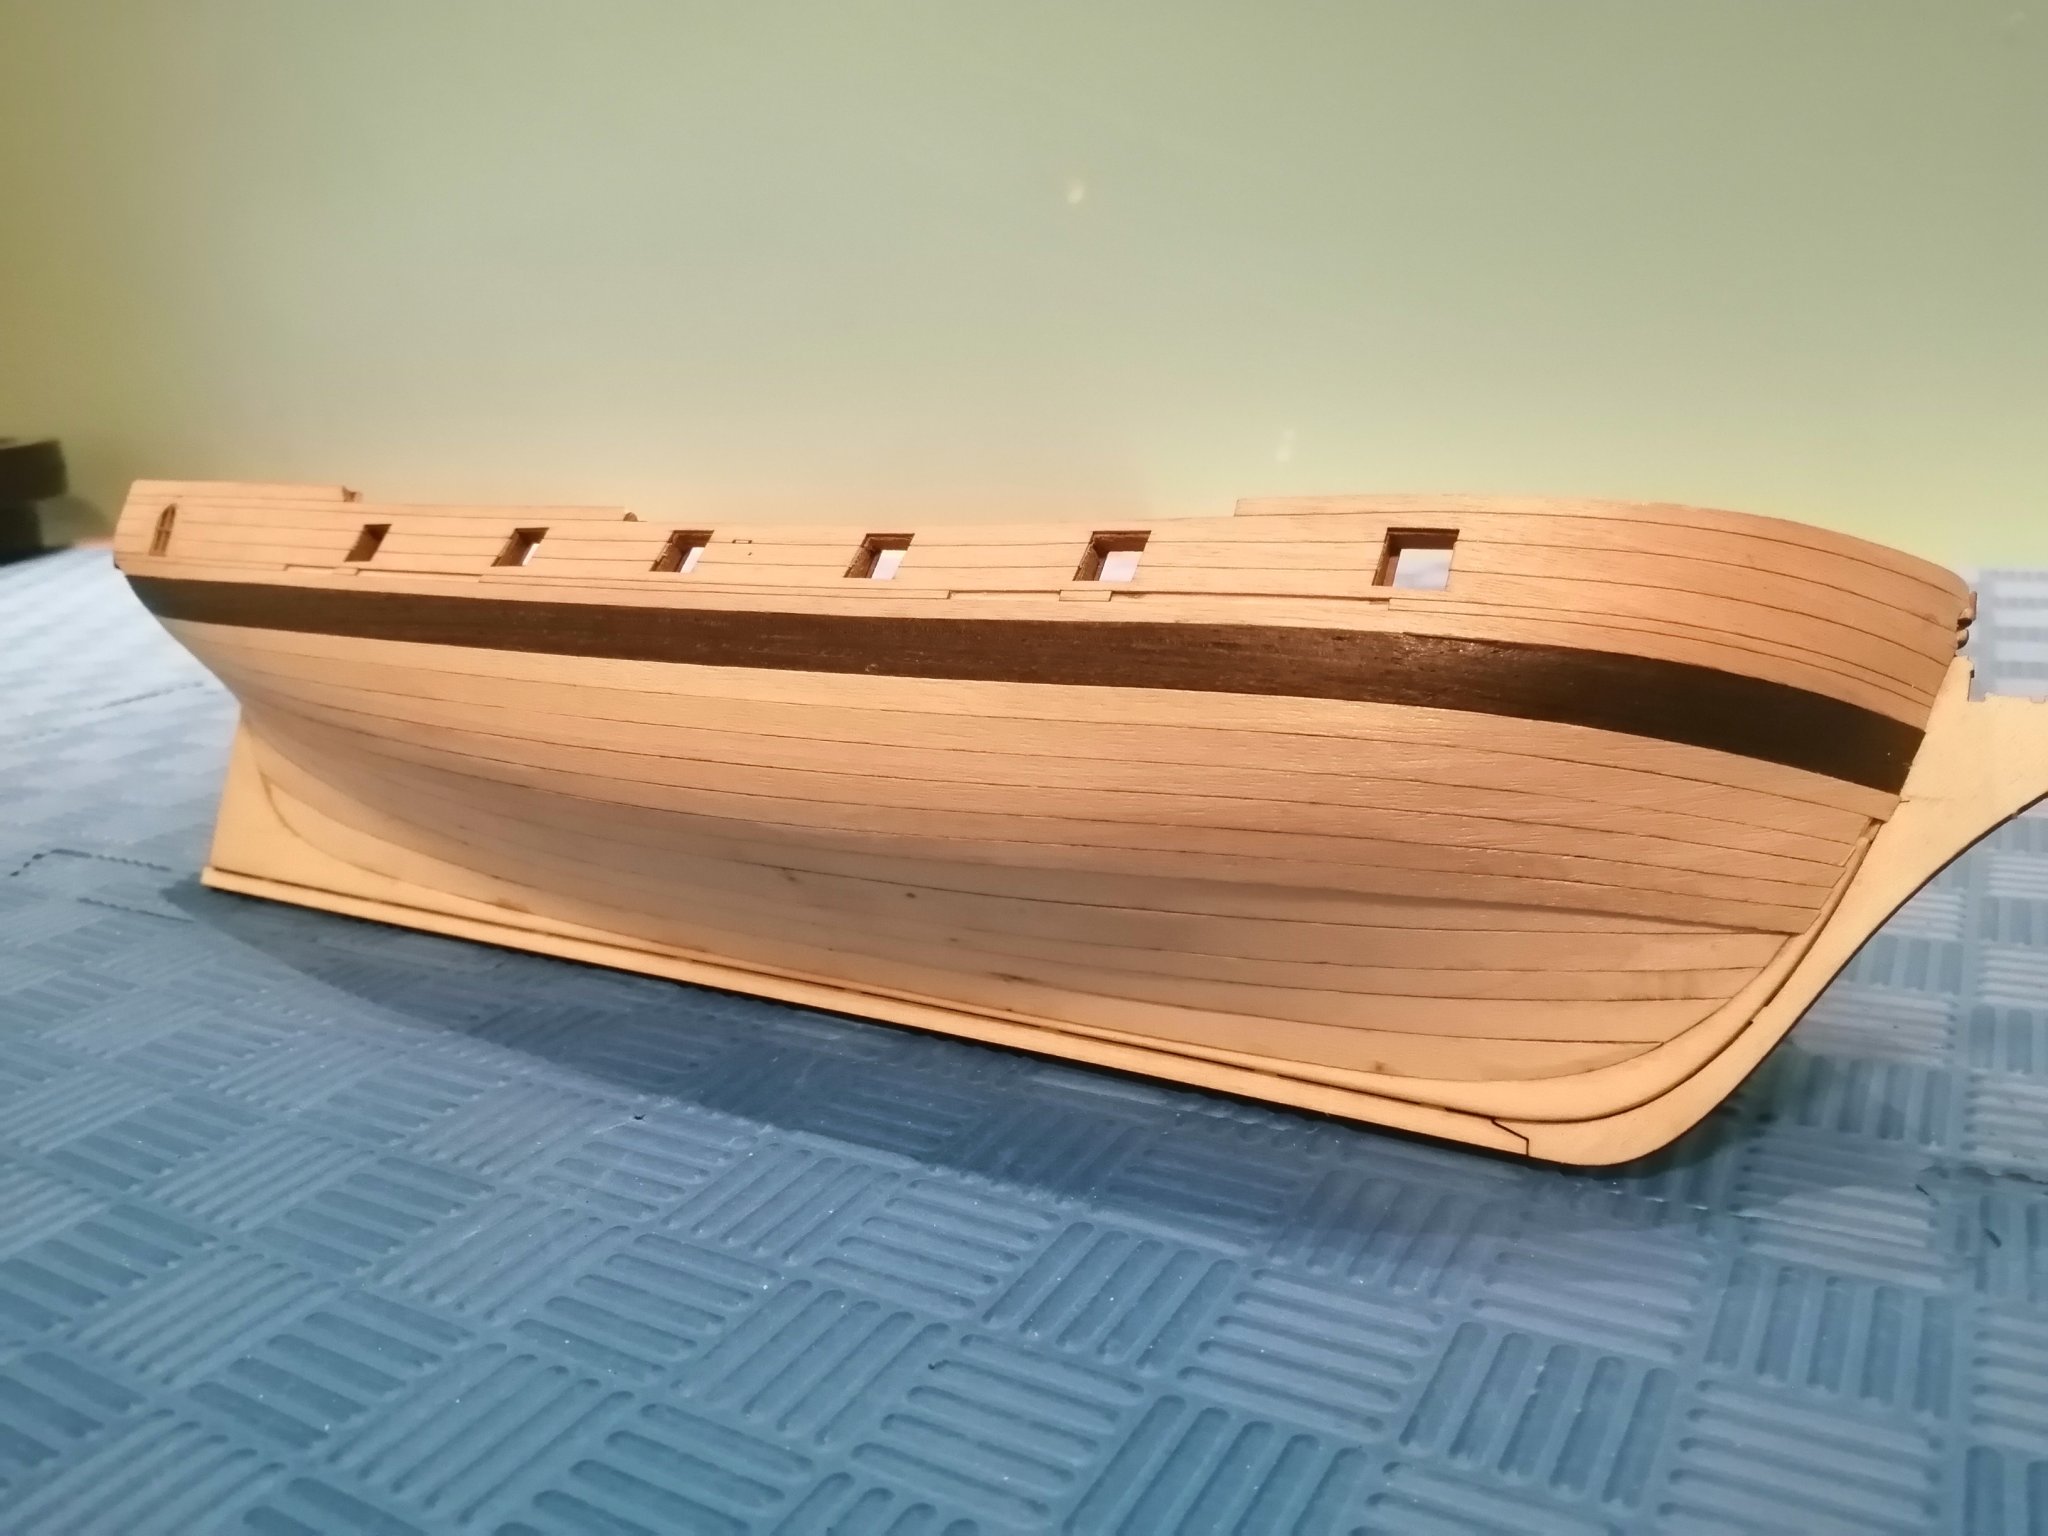 planking a model yacht hull